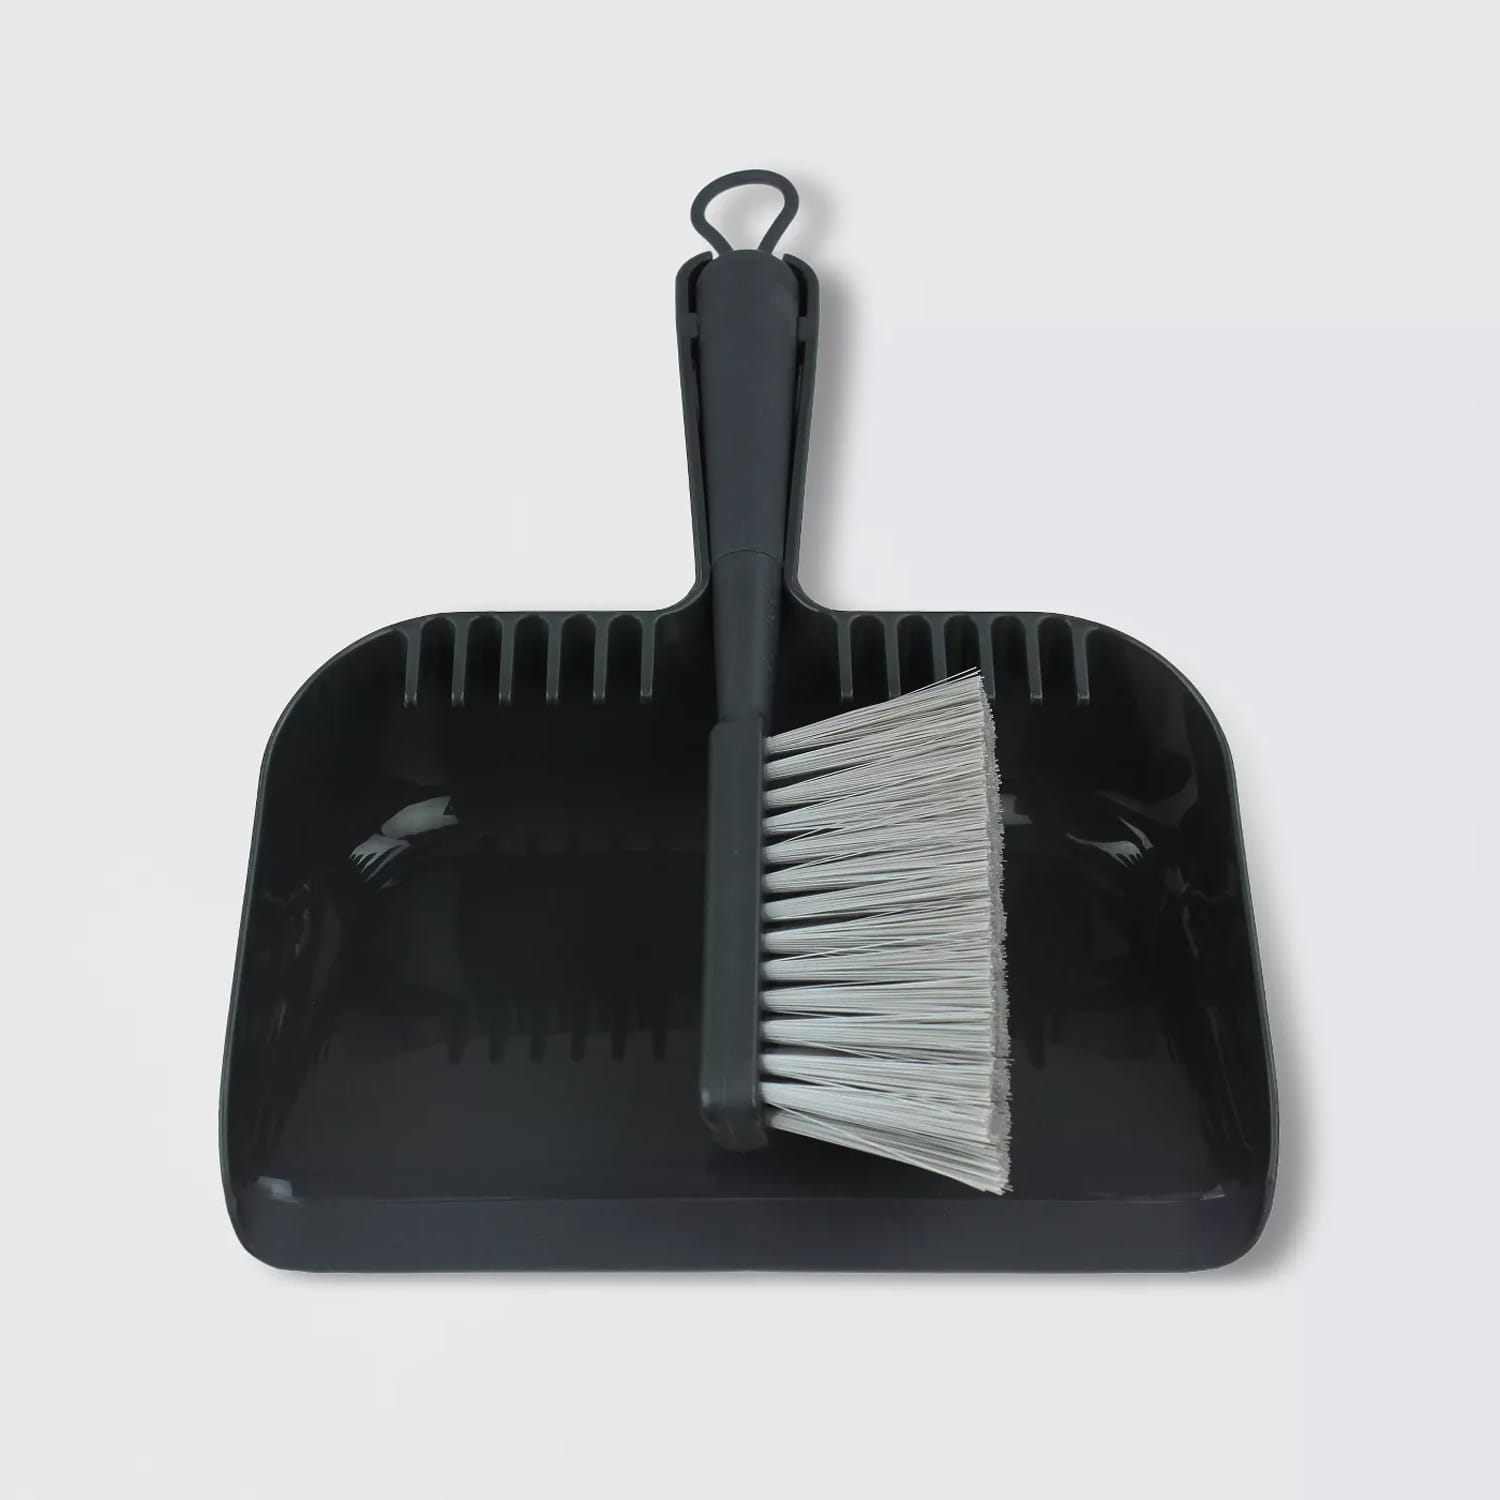 http://cdn.apartmenttherapy.info/image/upload/v1580164977/gen-workflow/product-listing/made-by-design-hand-broom.jpg